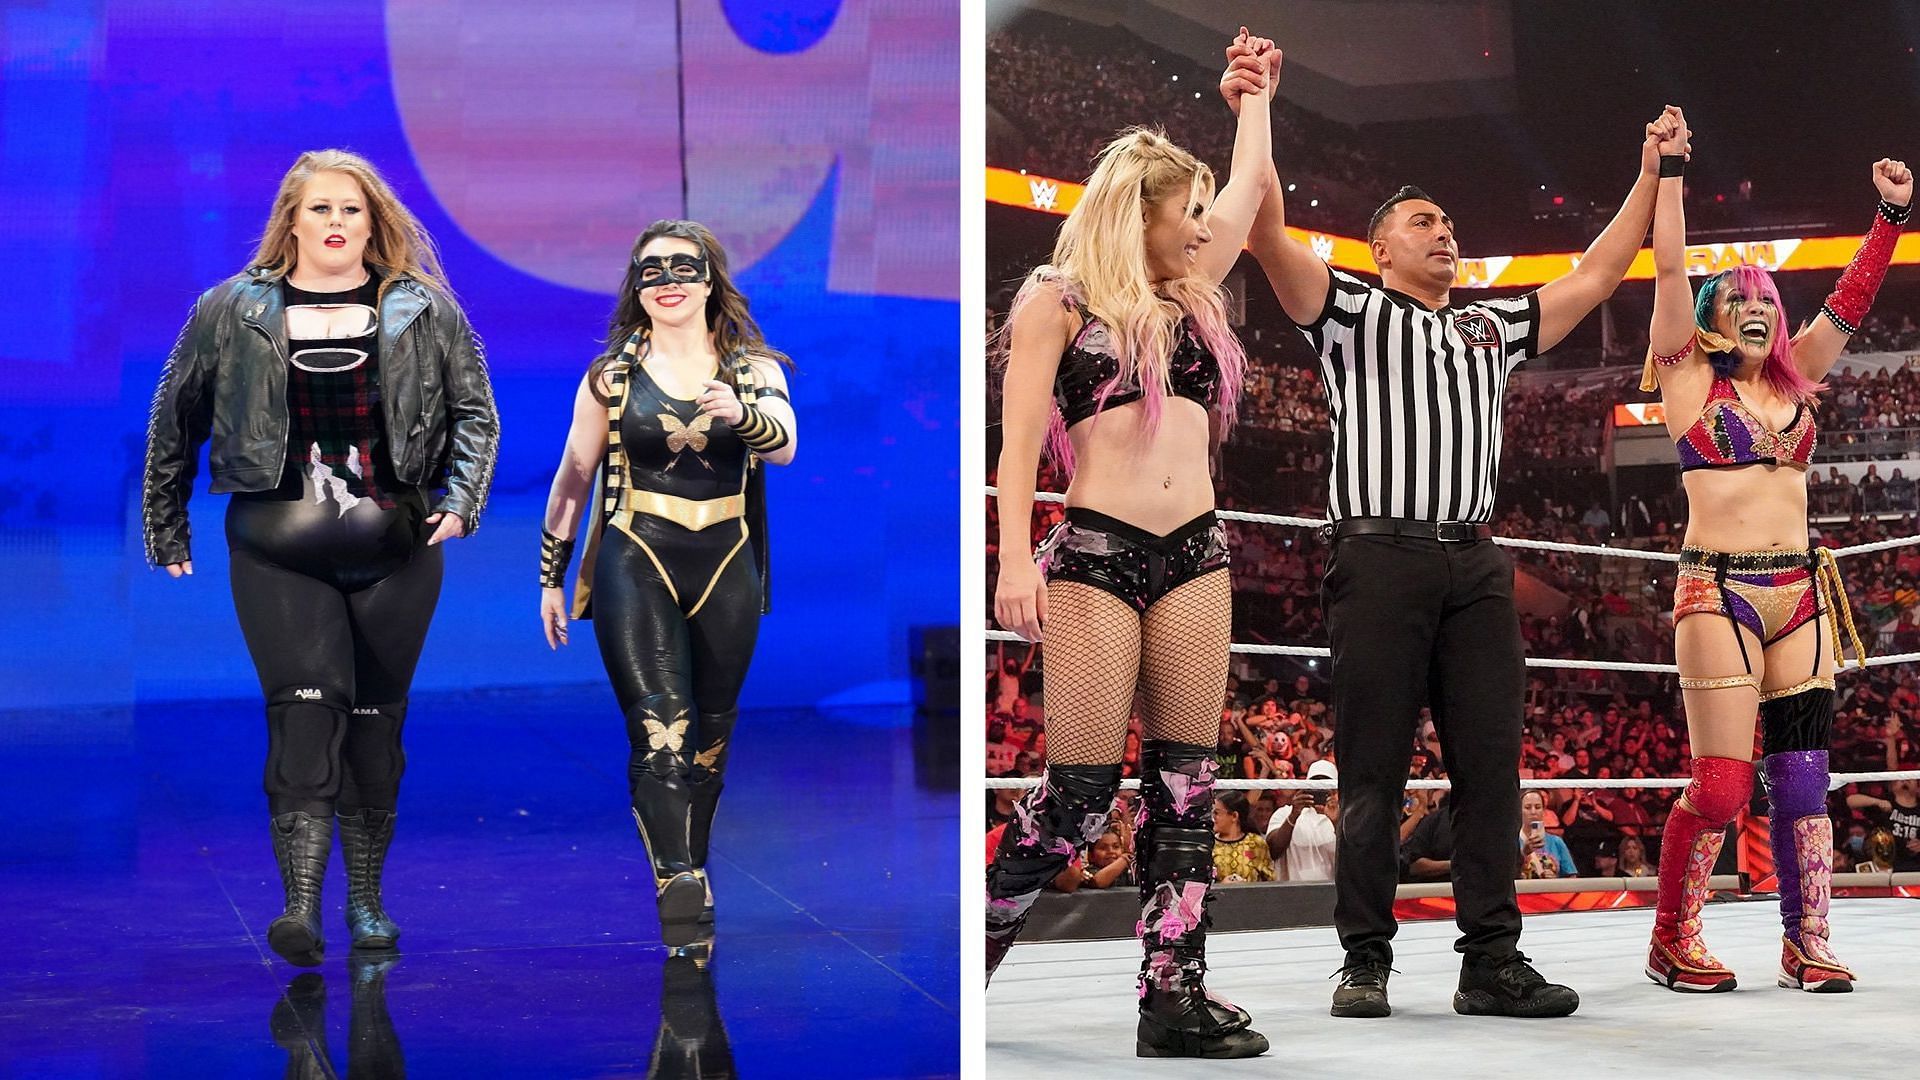 Alexa Bliss and Doudrop are set to collide with Nikki A.S.H. and Doudrop on WWE RAW